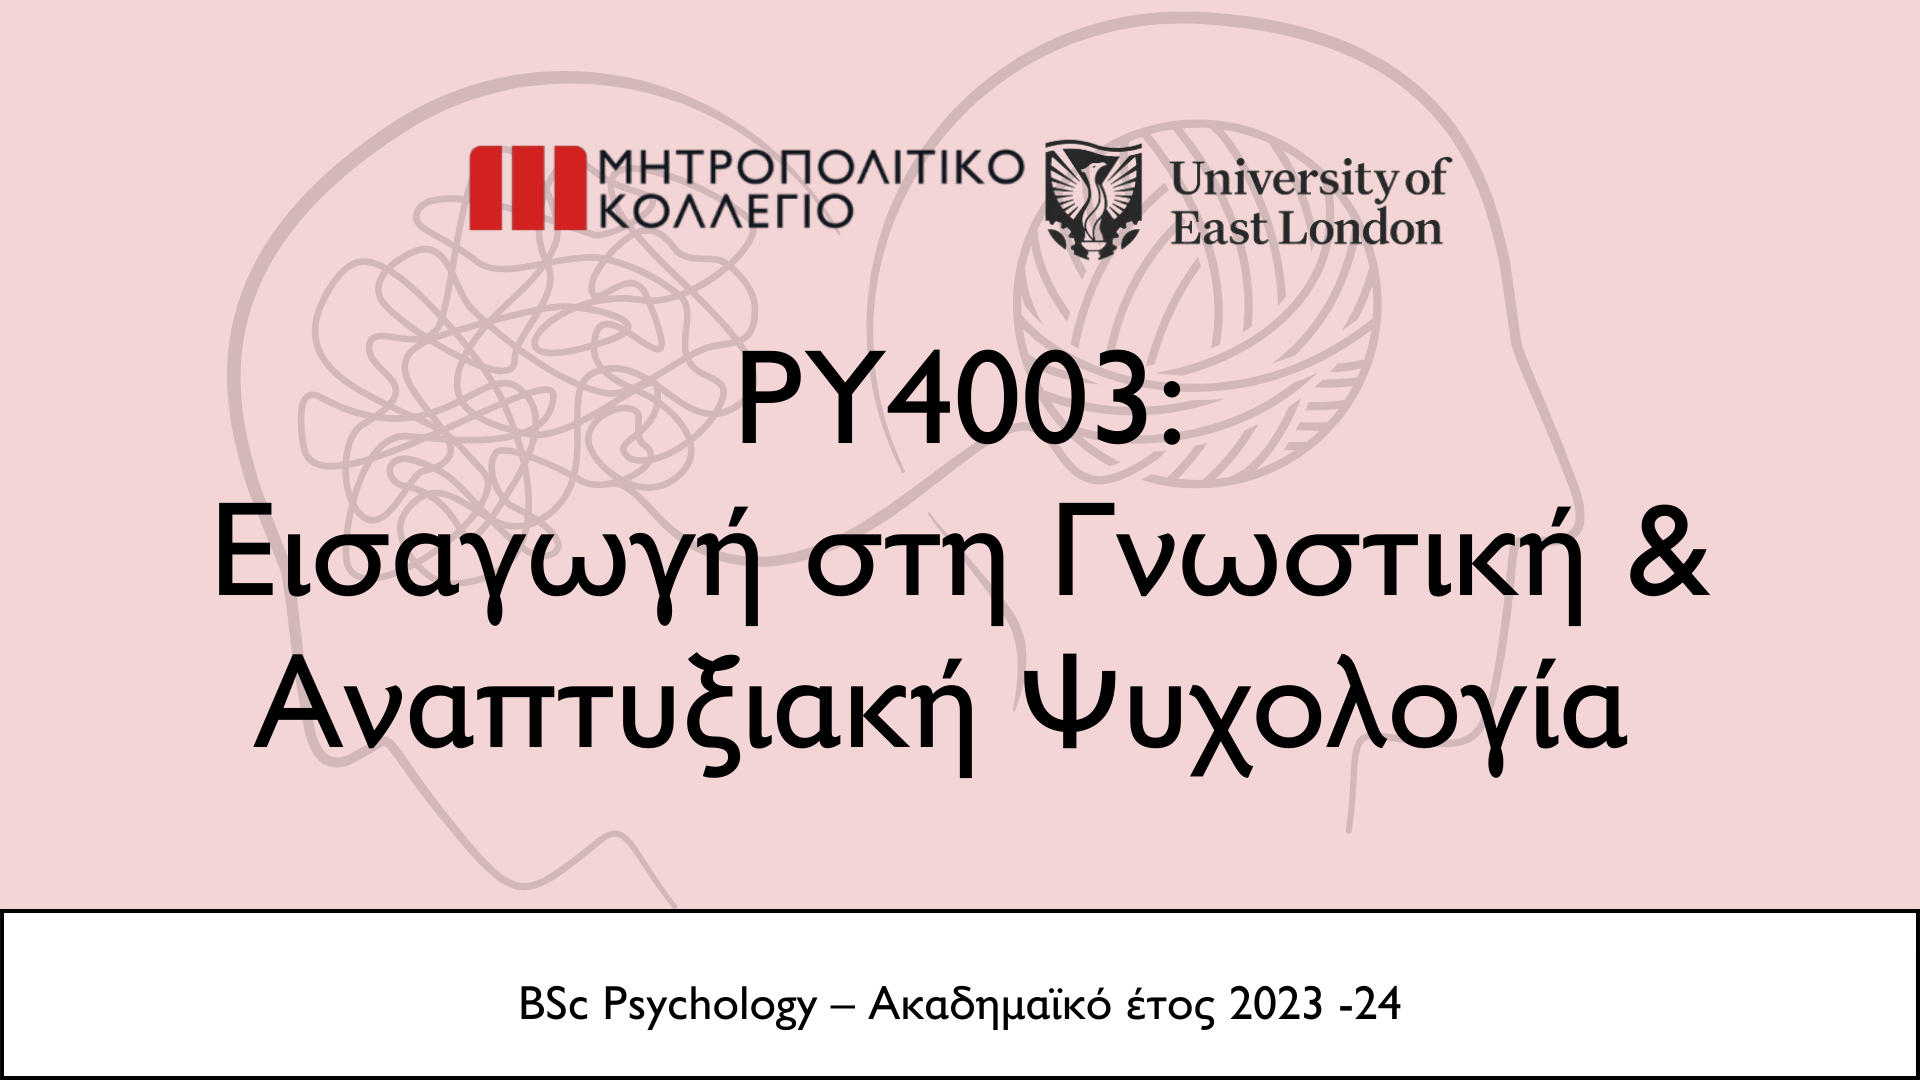 INTRODUCTION TO COGNITIVE AND DEVELOPMENTAL PSYCHOLOGY (PY4003_1)